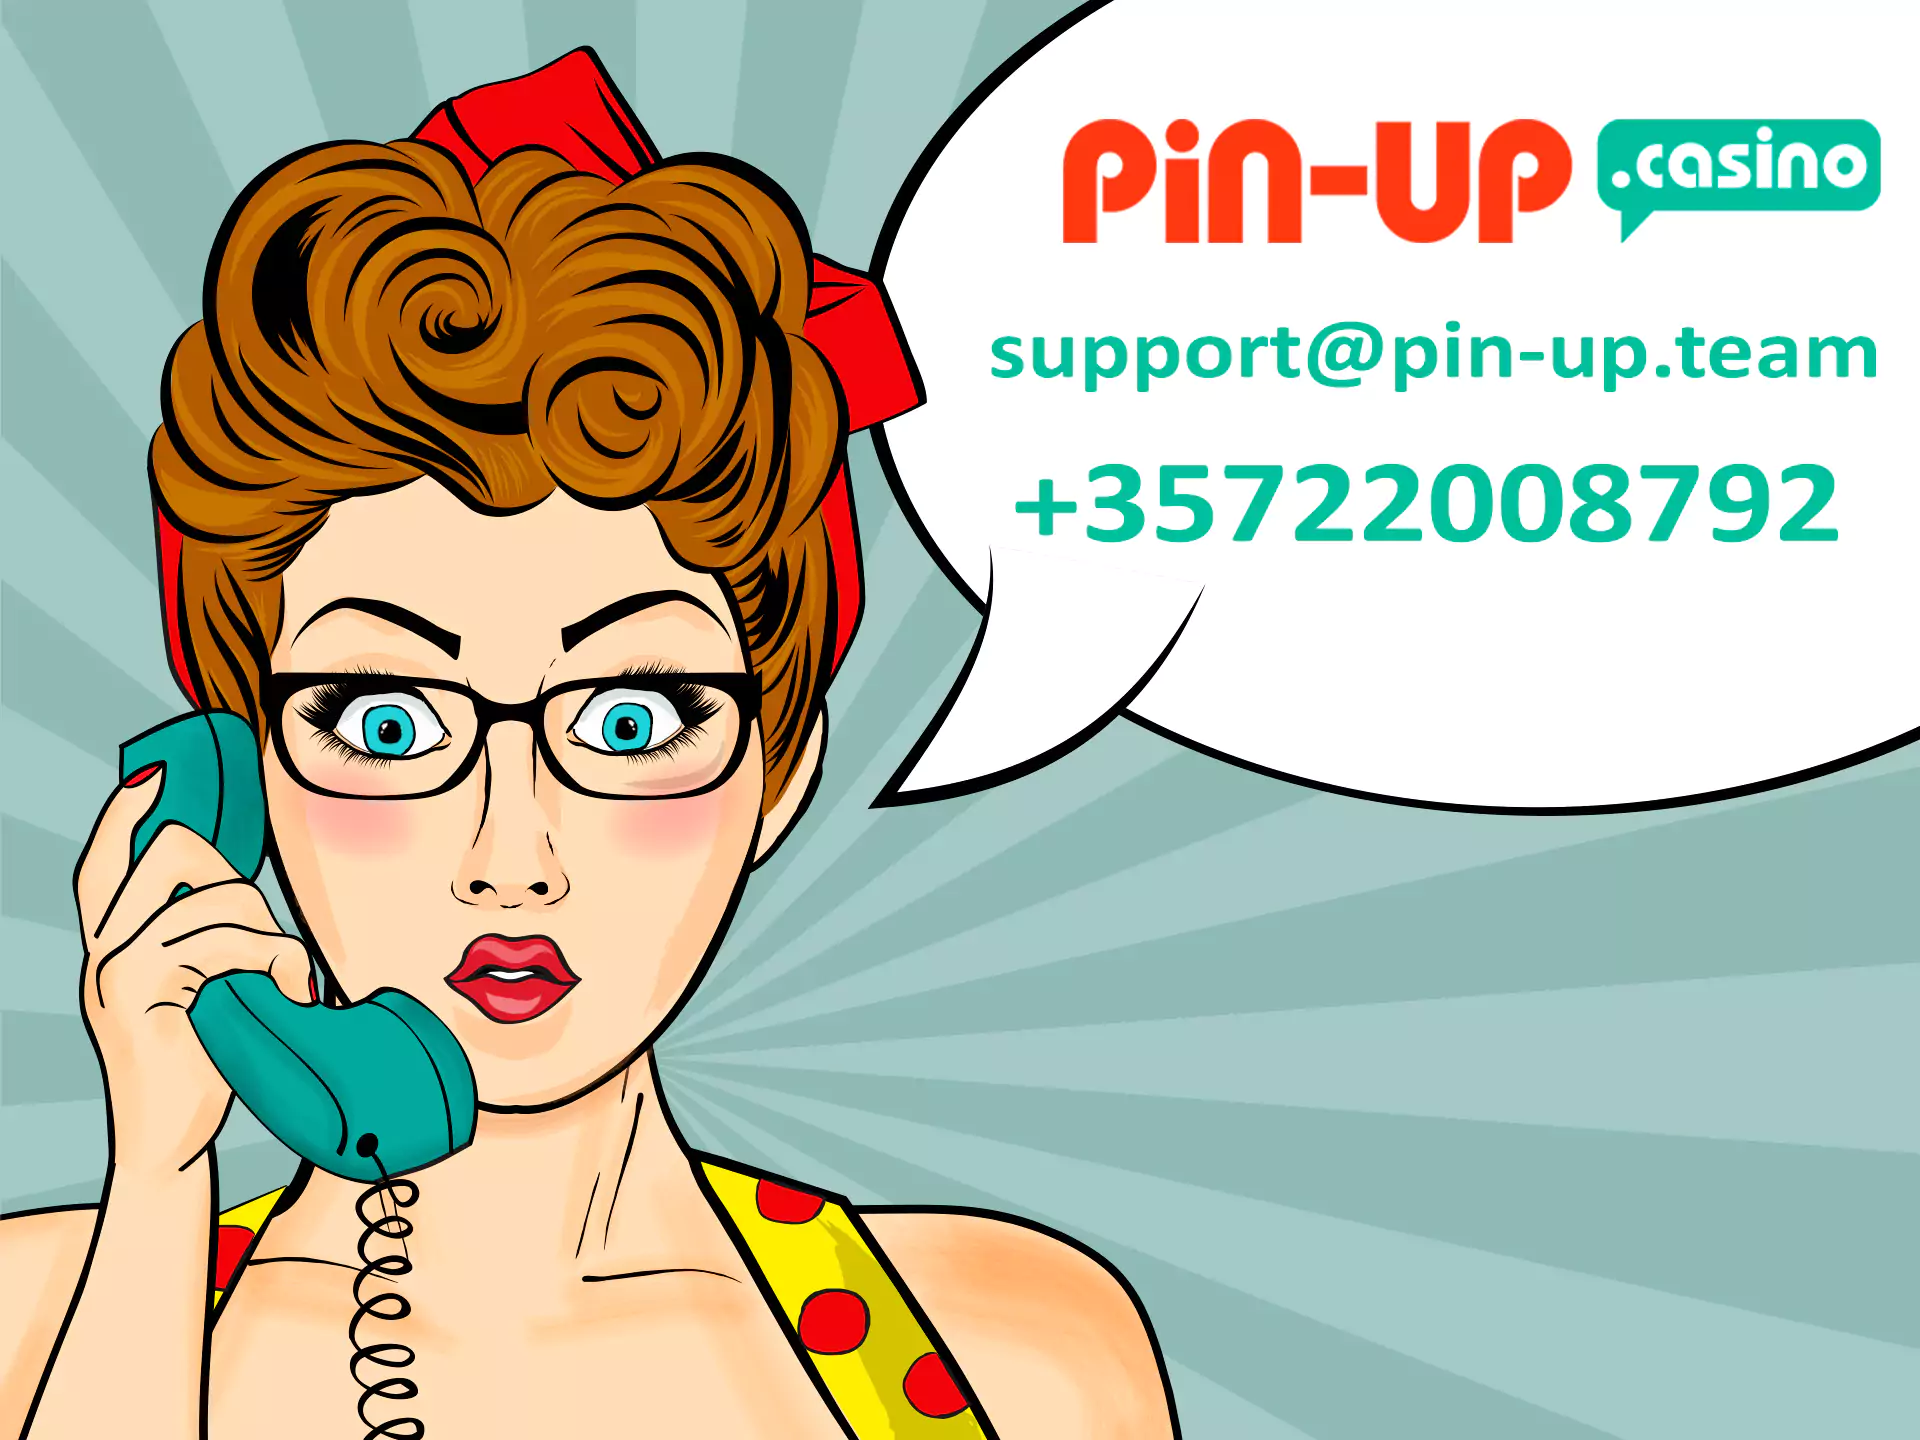 Whenever you have questions you can contact the Pin-Up support team.